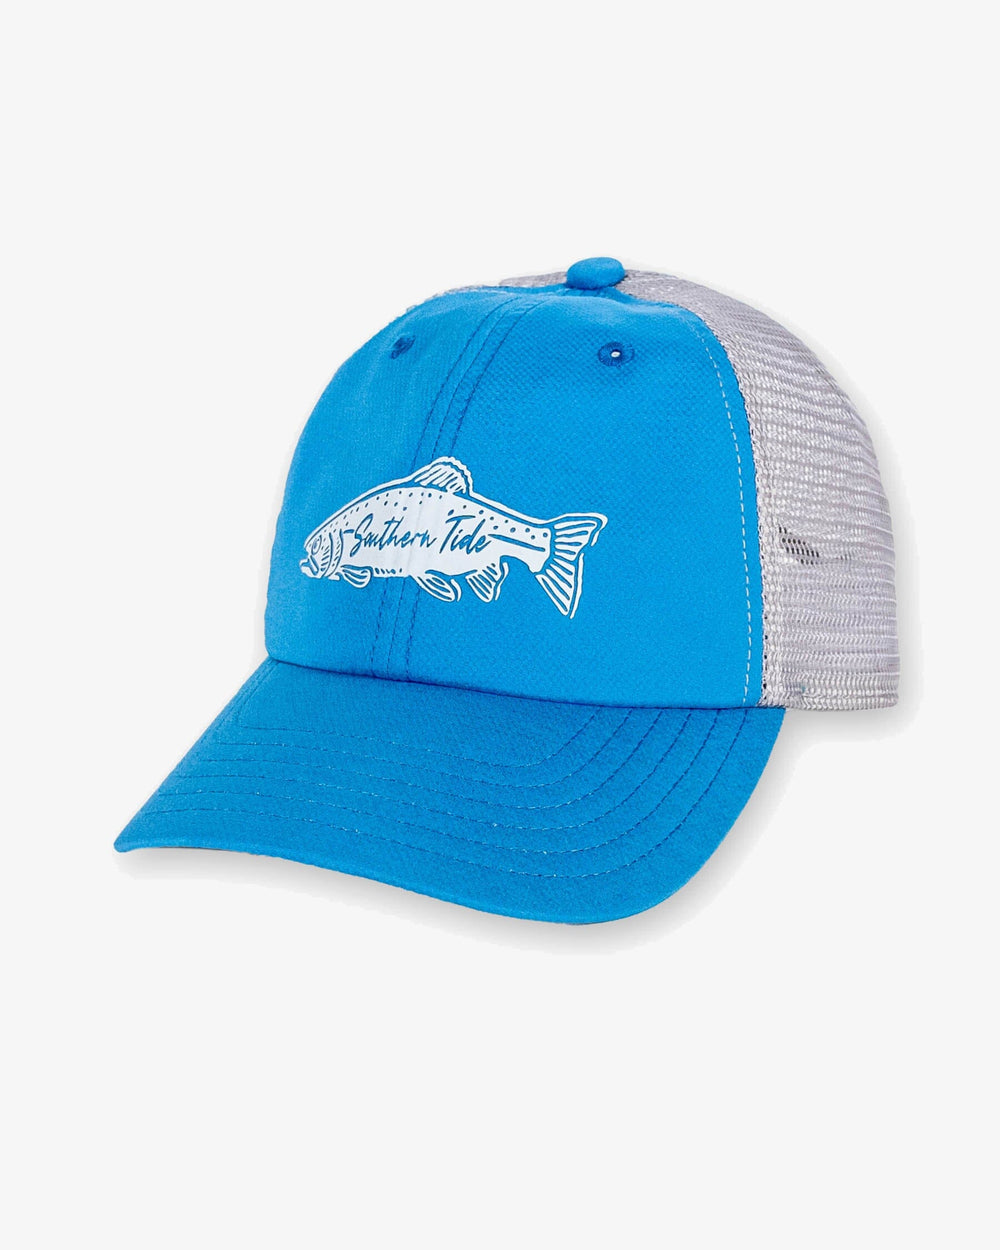 The front view of the Southern Tide Flyday Trucker Hat by Southern Tide - Blue